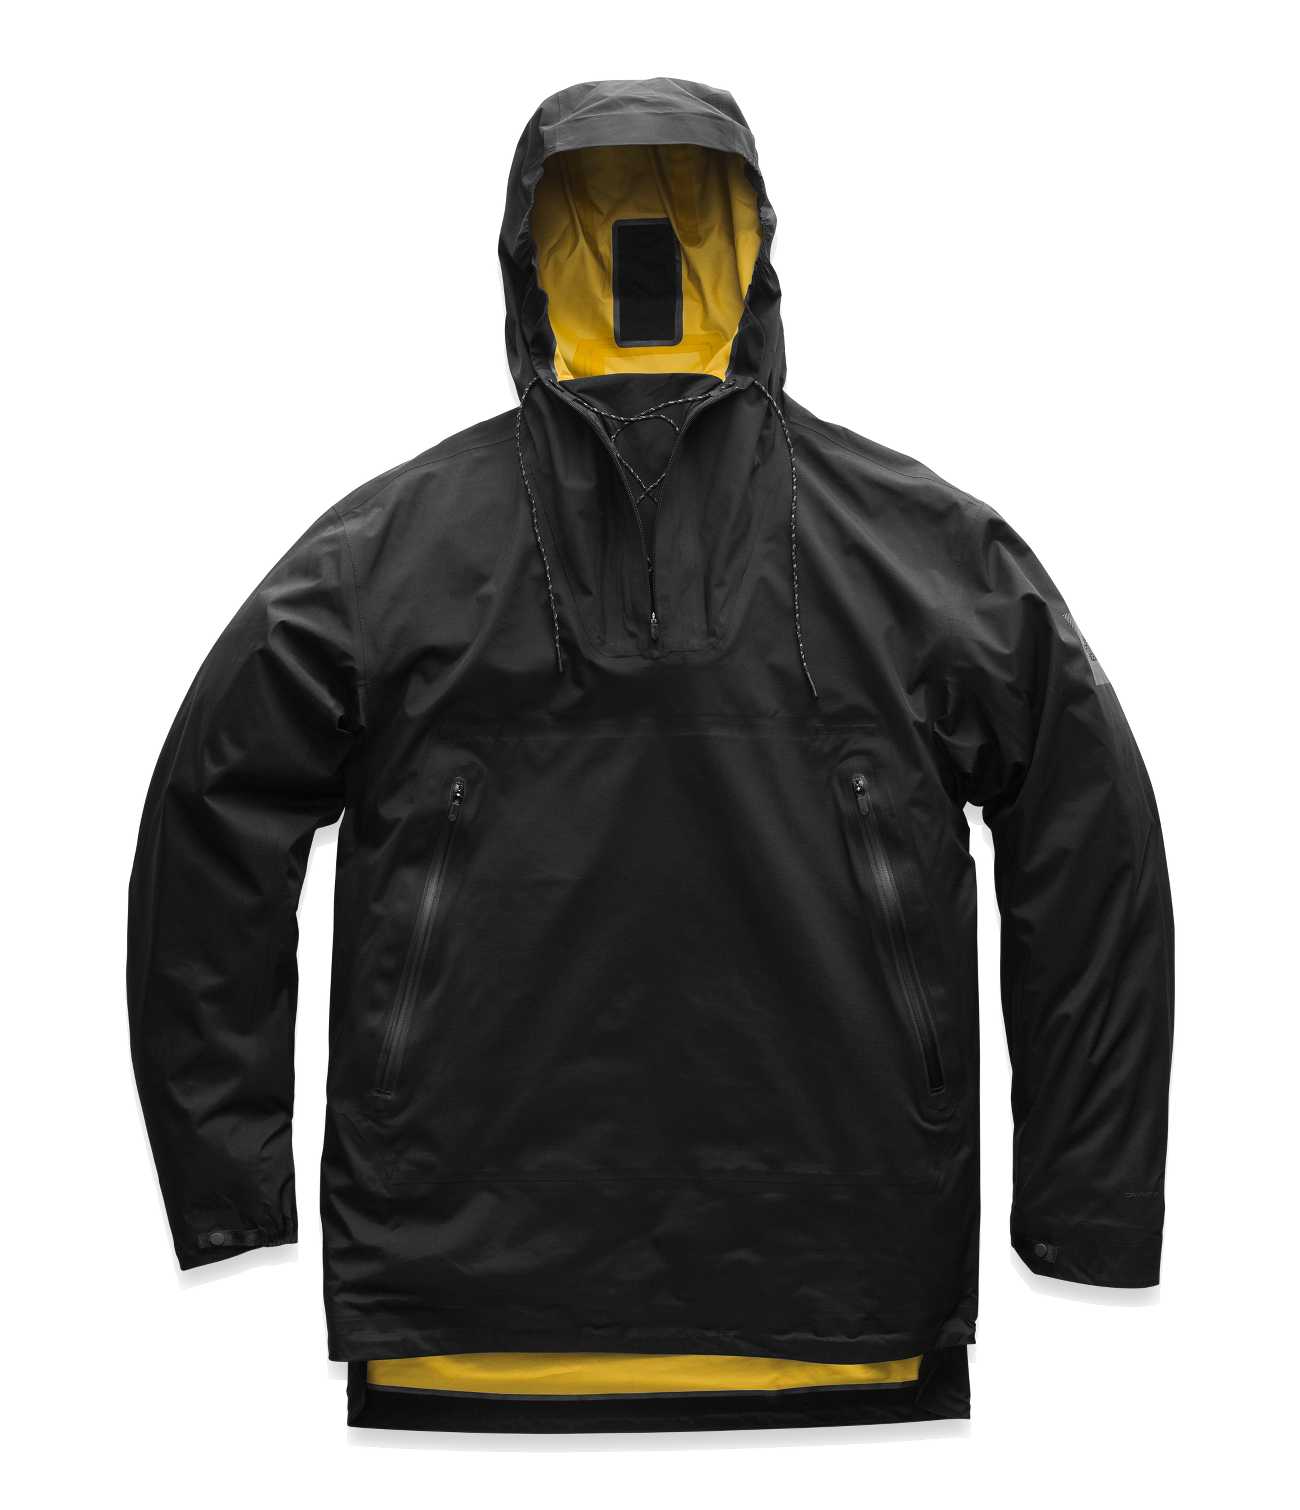 Glimmend inhoudsopgave Armoedig The North Face Renewed - MEN'S CRYOS 3L NEW WINTER CAGOULE JACKET